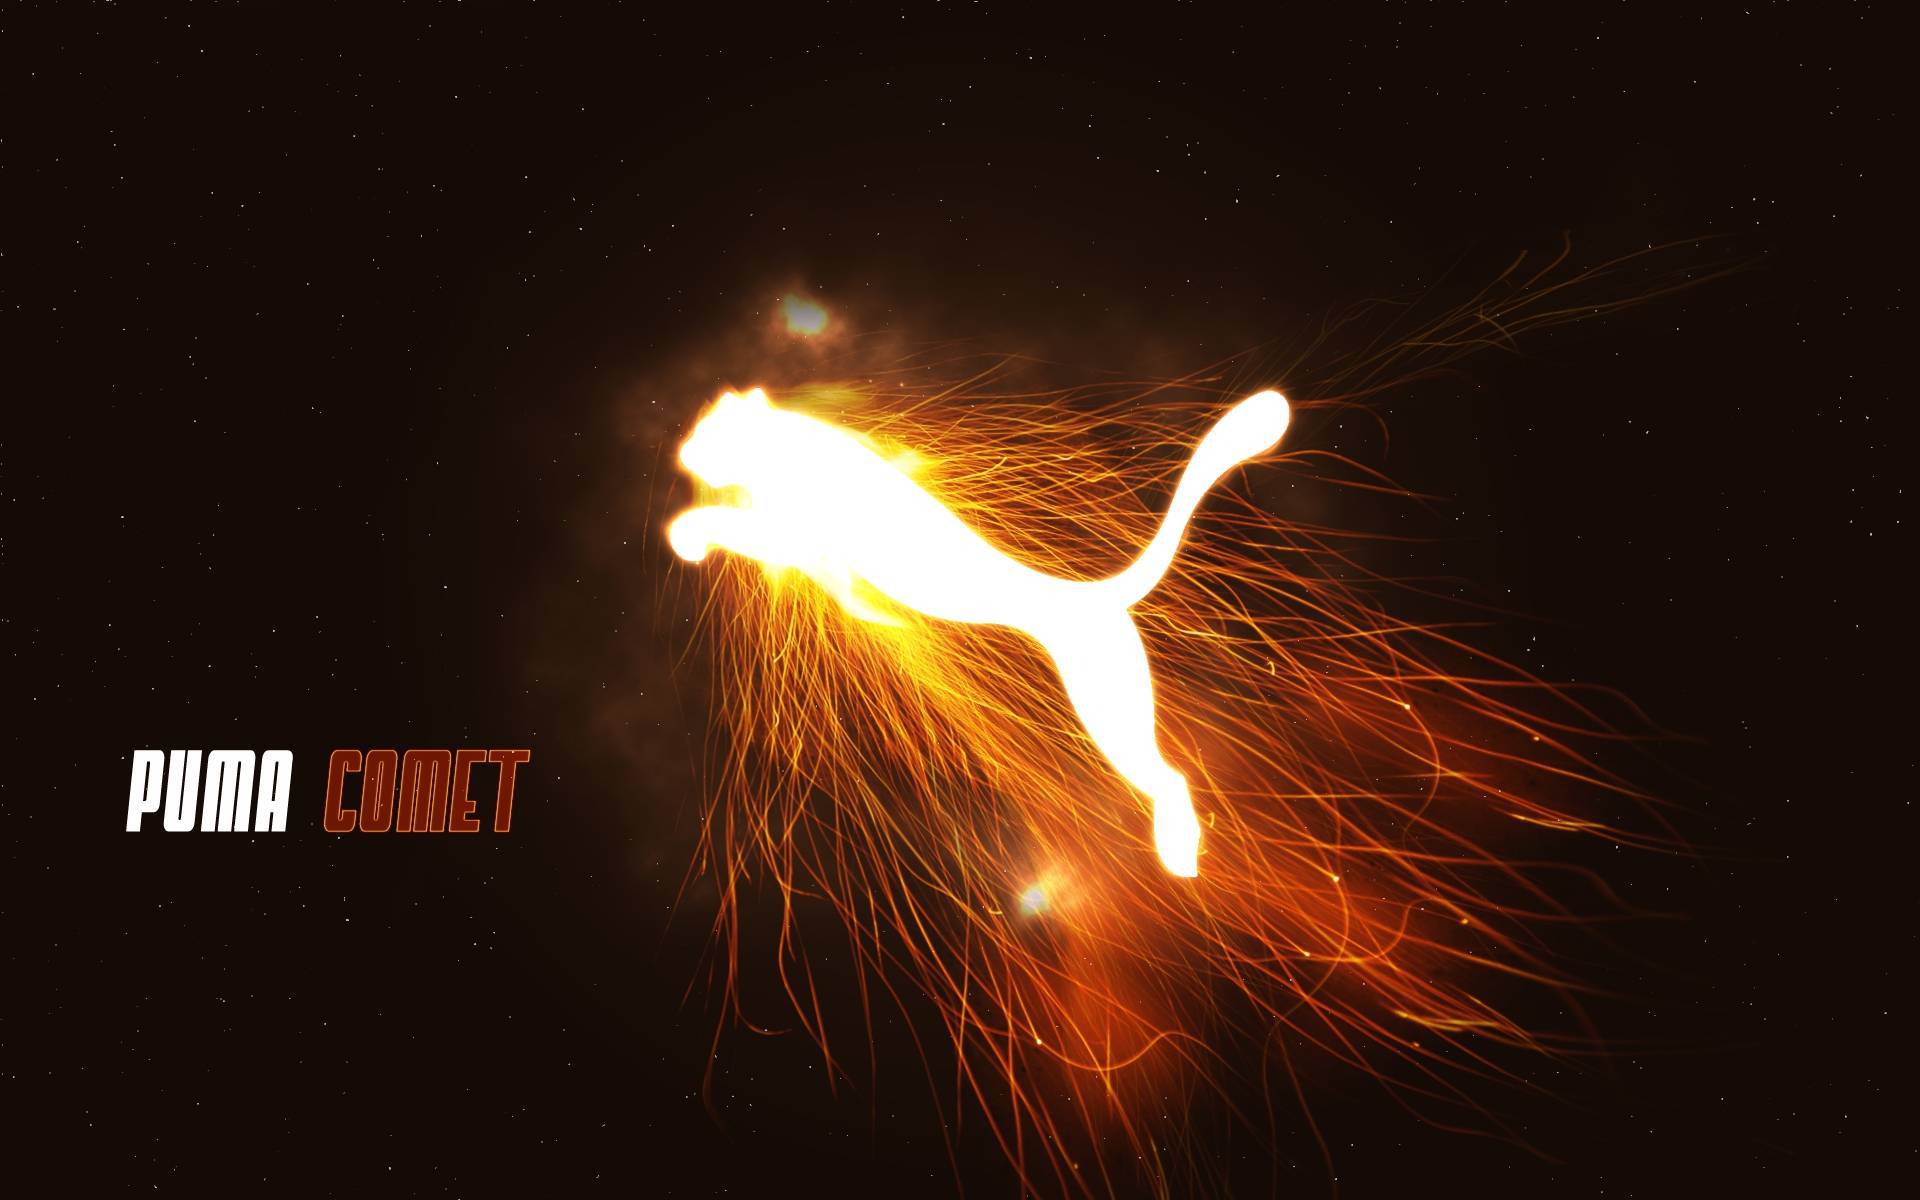 Puma comet logo wallpapers and images   wallpapers pictures photos